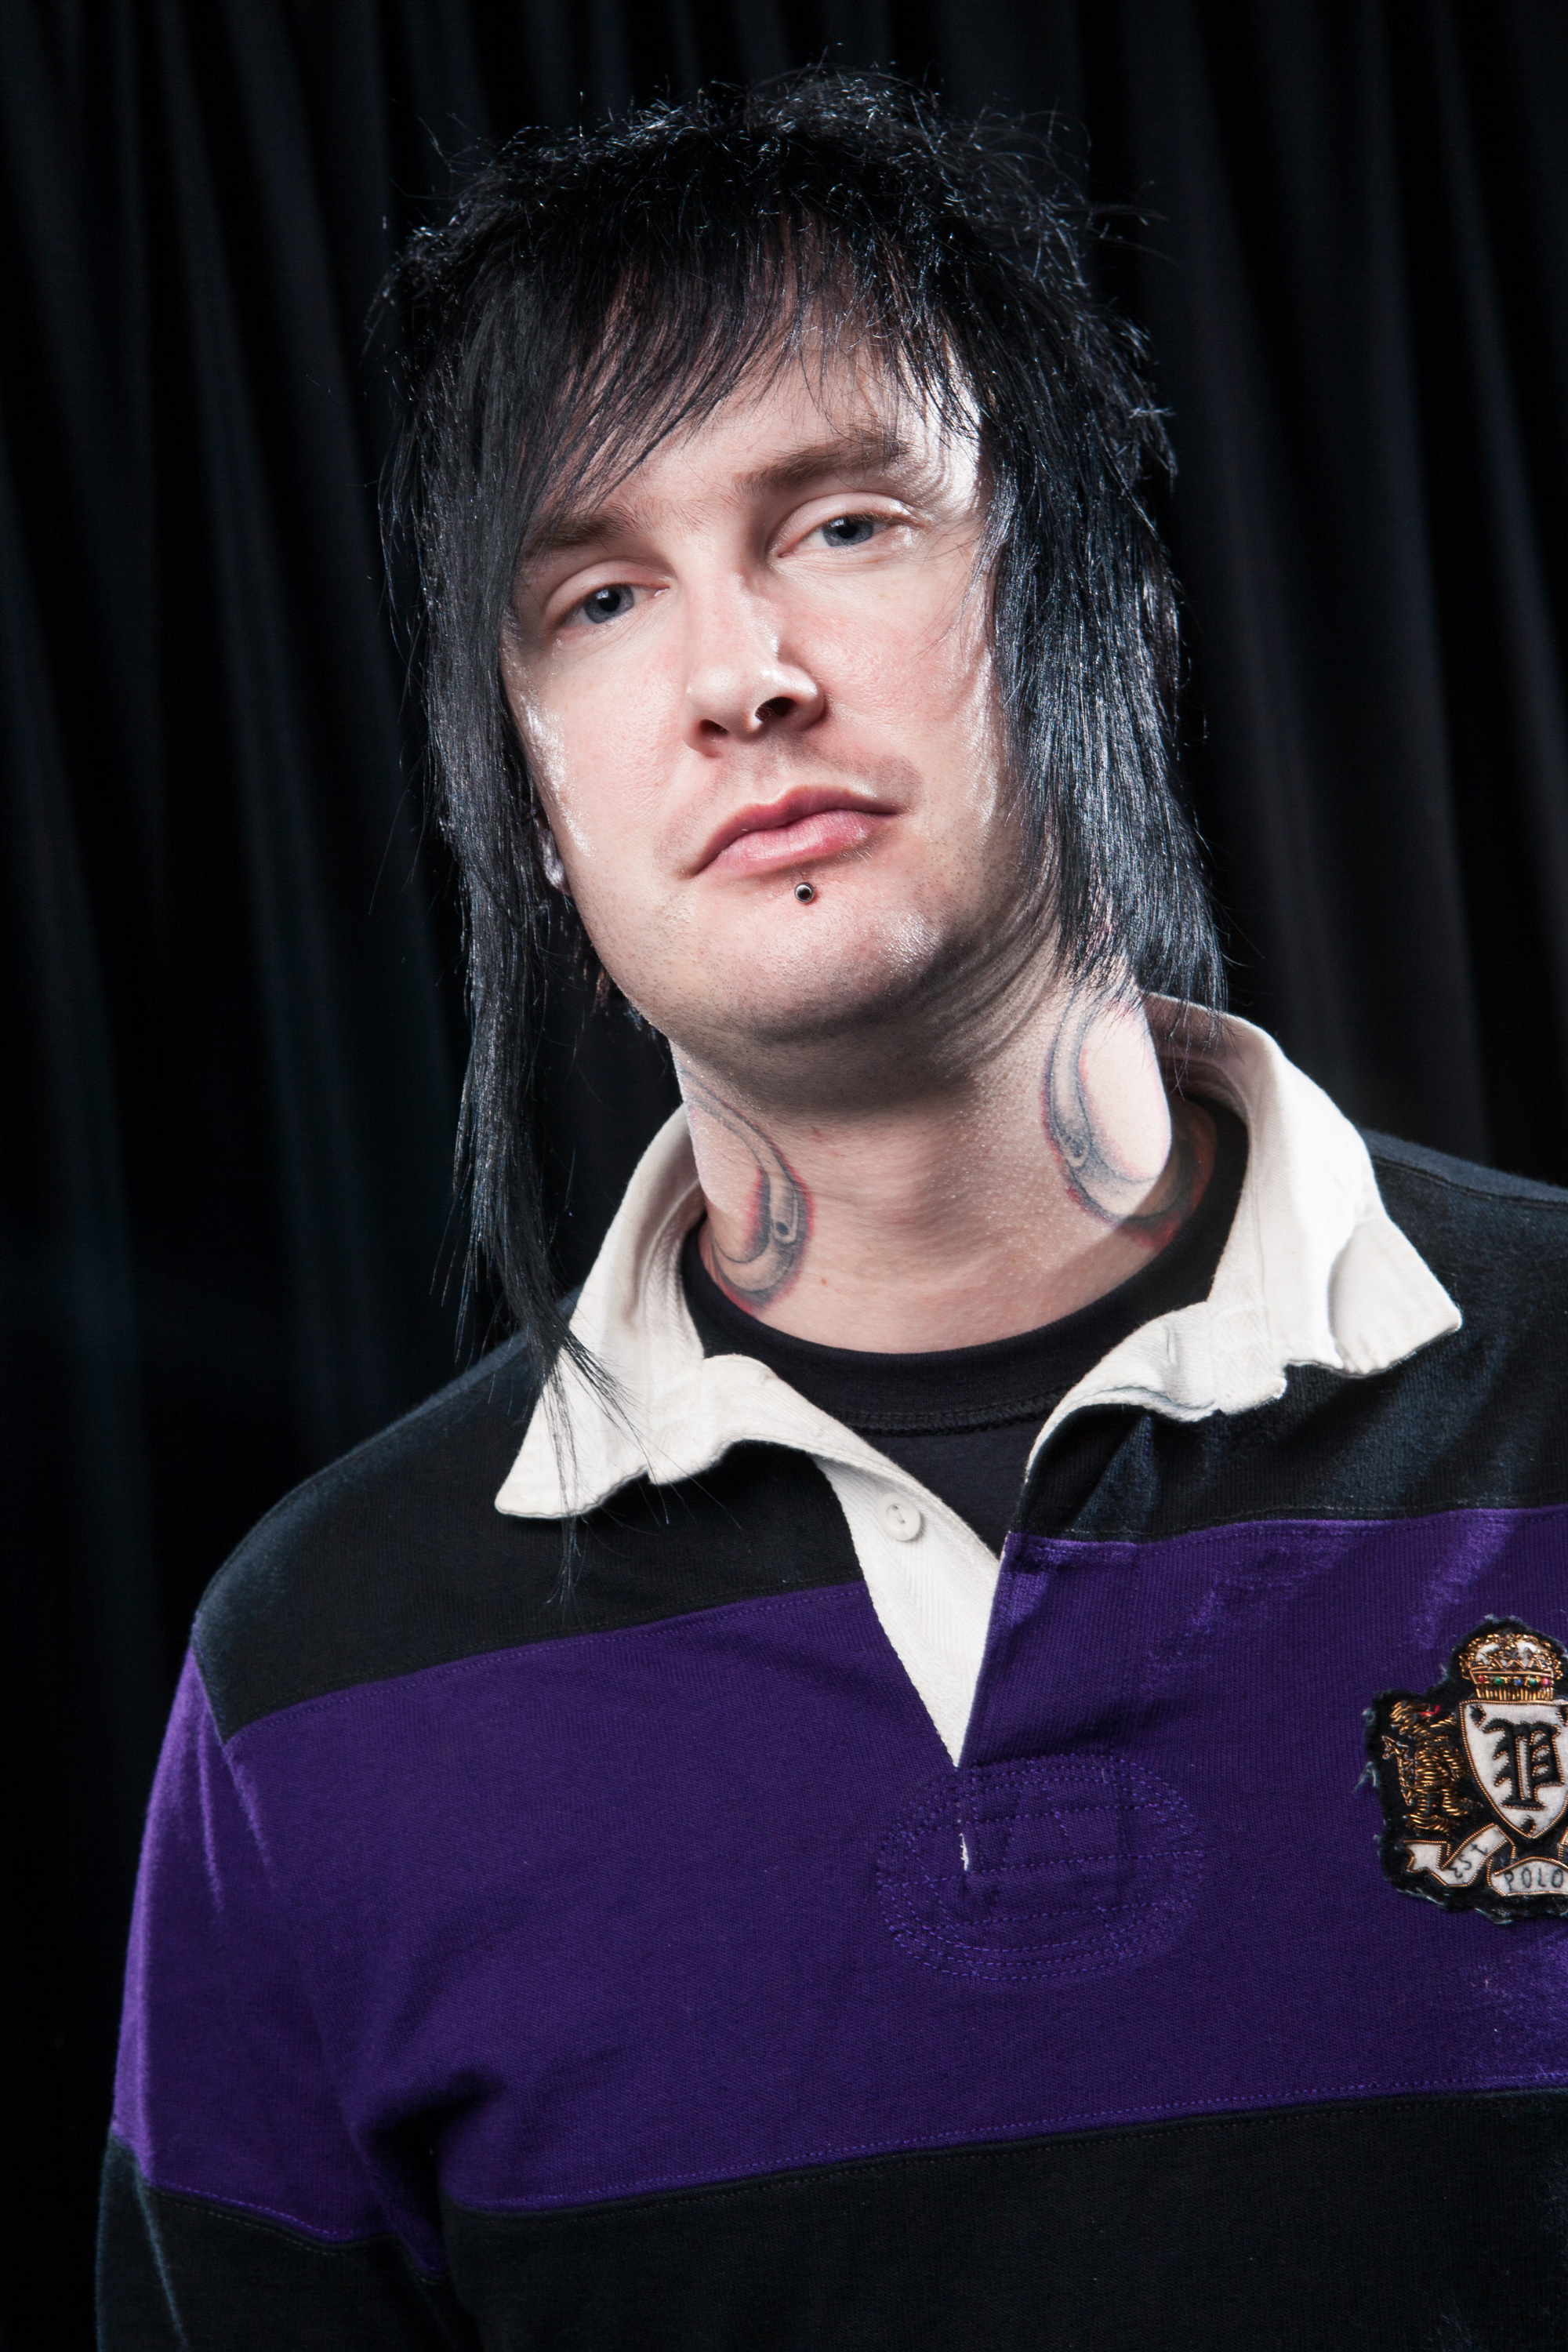 double bass drum the rev